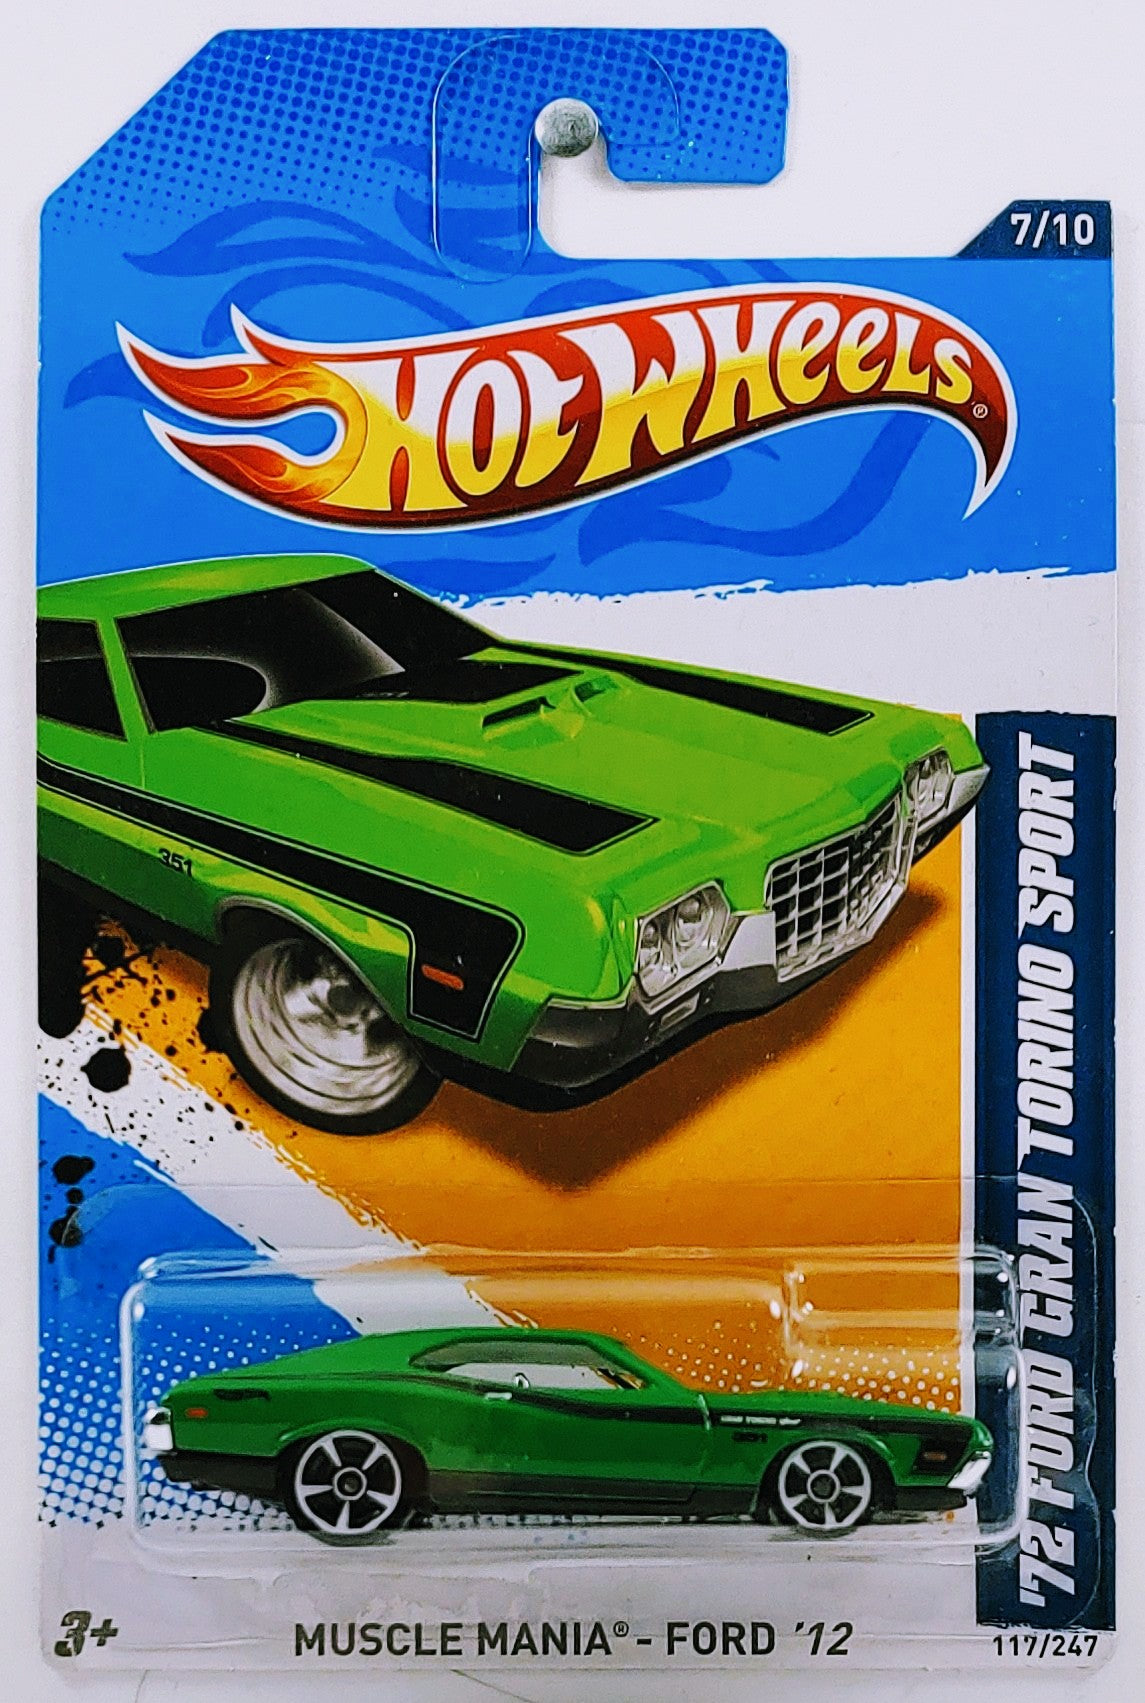 Hot Wheels 2012 - Collector # 117/247 - Muscle Mania - Ford 7/10 - '72 Ford Gran Torino Sport - Green - White OH5 Wheels - USA